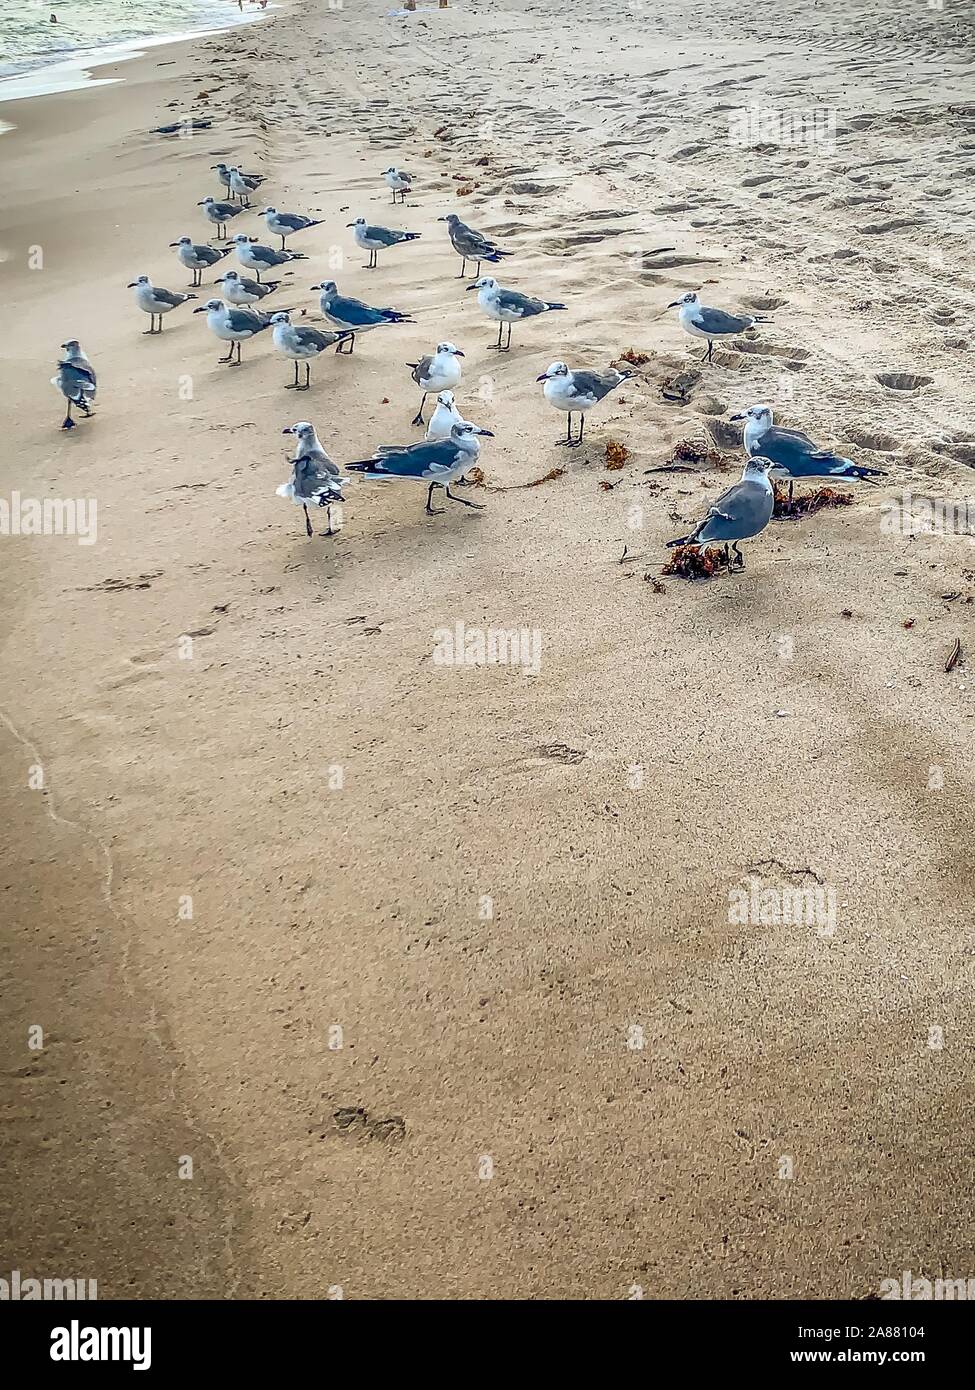 Fort Lauderdale, Florida - seagulls on the beach Stock Photo